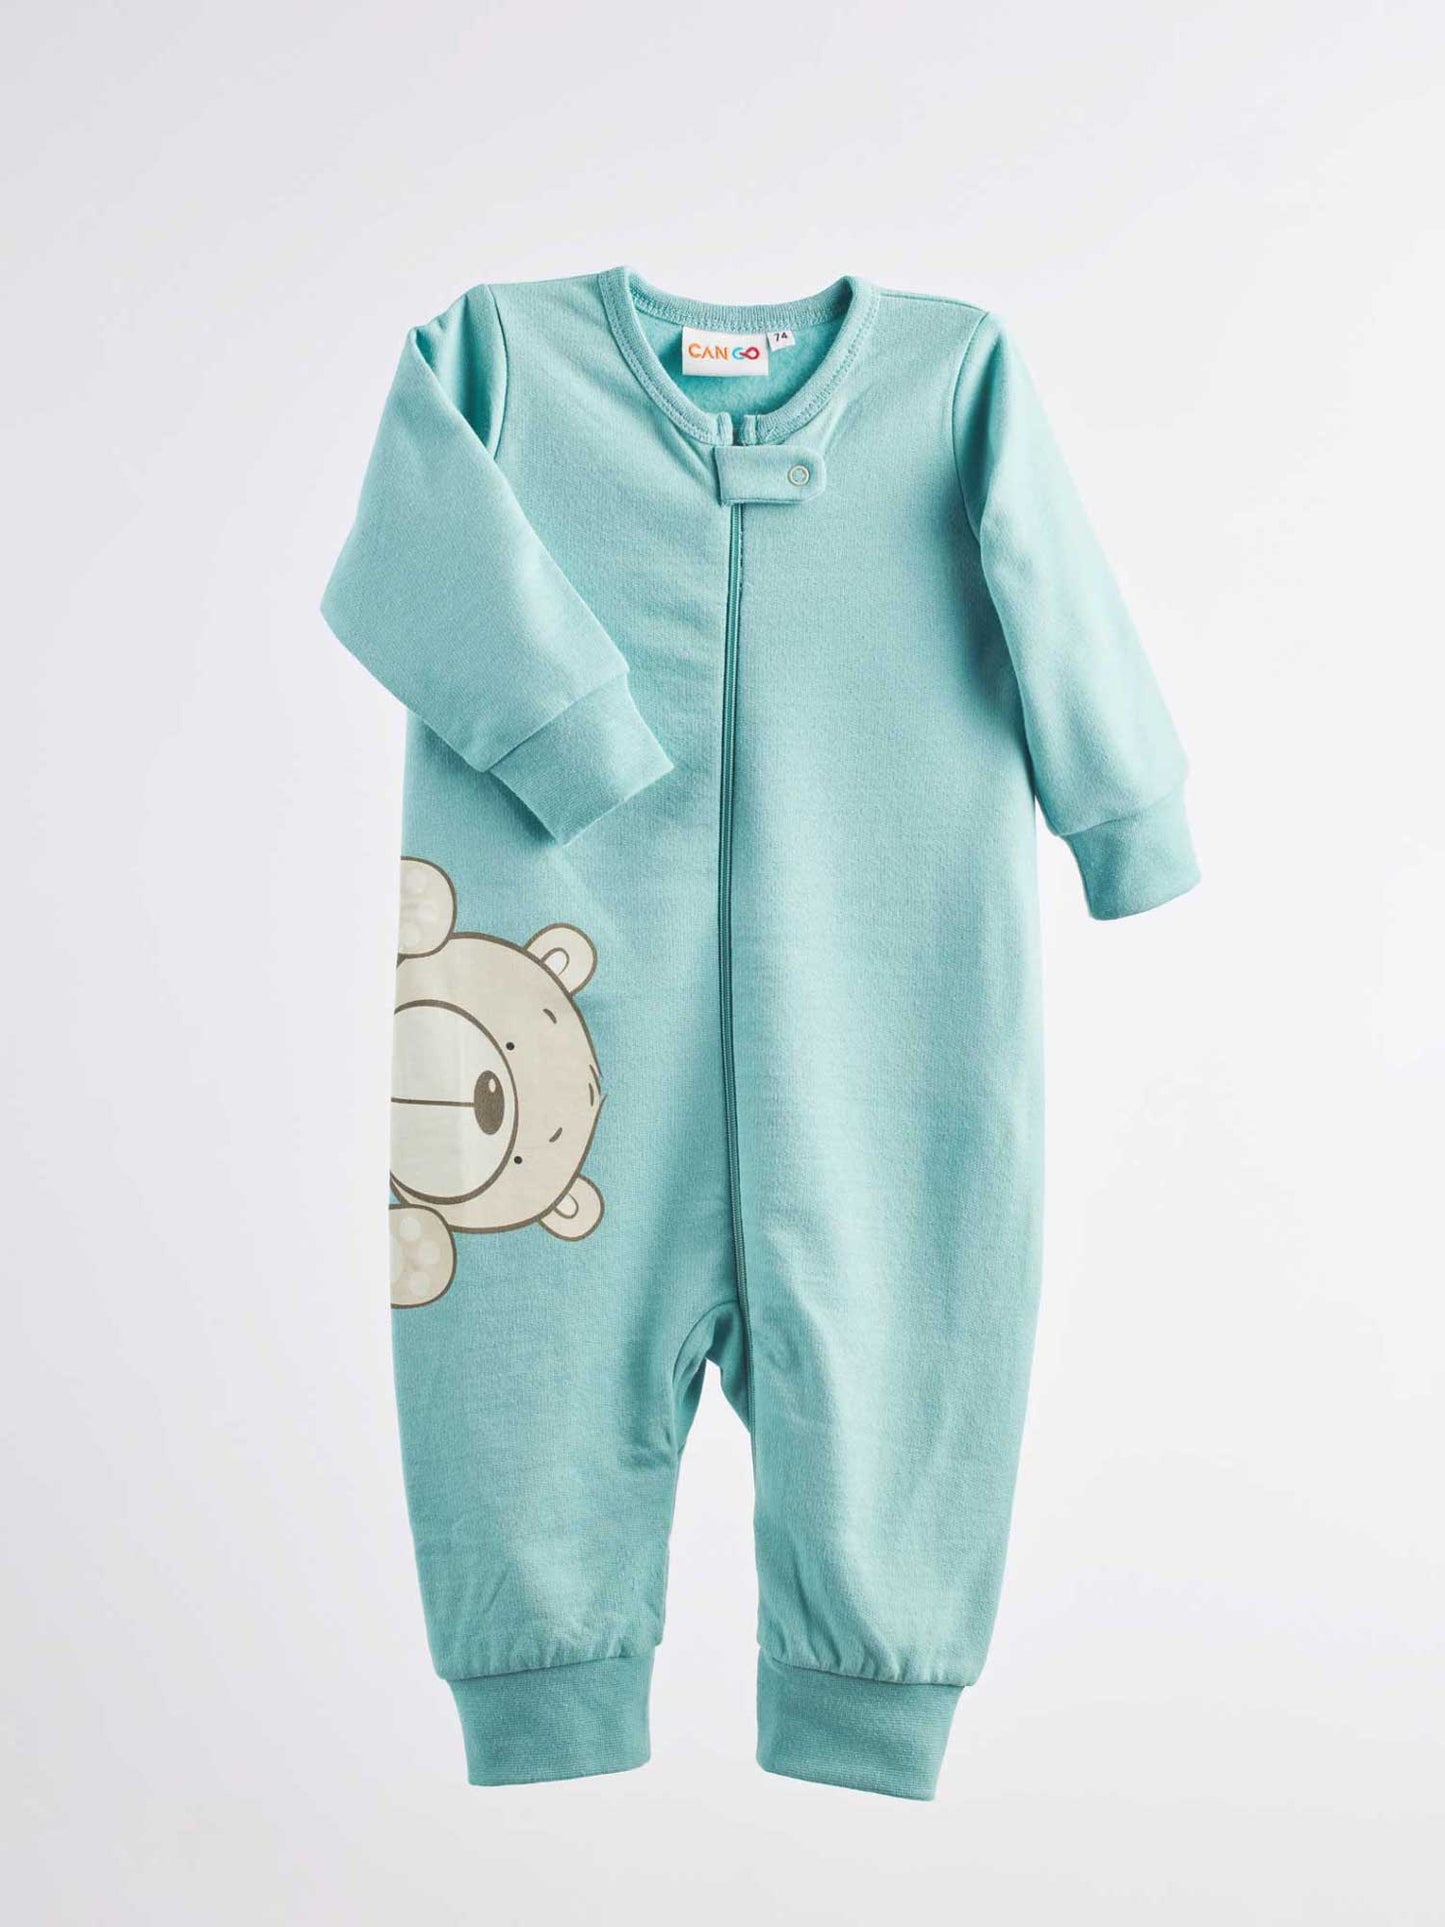 Made from especially soft cotton material, Infant Overall Bear & Bunny 378 one-piece overalls are thicker and warmer than sleeping overalls, therefore are suitable for outerwear.